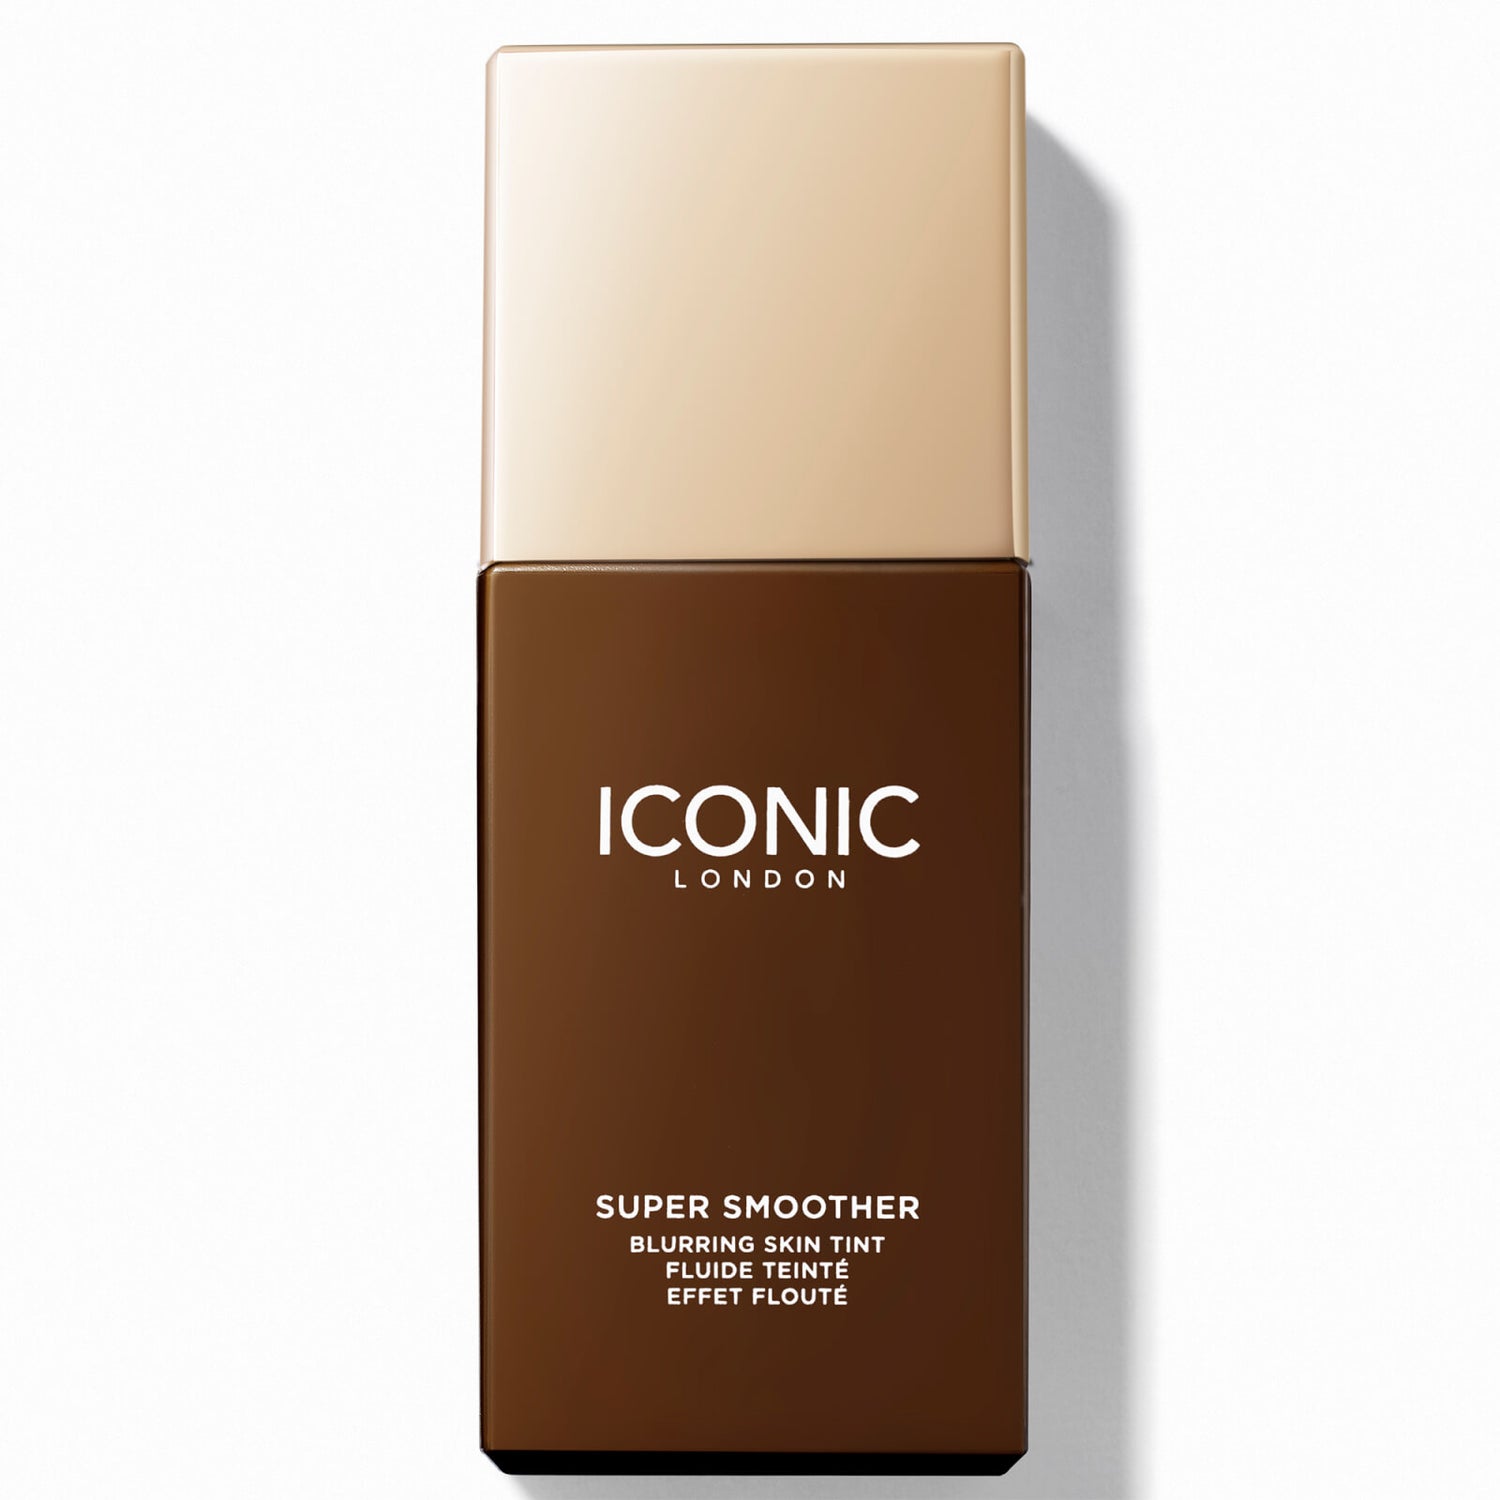 ICONIC London Super Smoother Blurring Skin Tint 30ml (Various Shades)